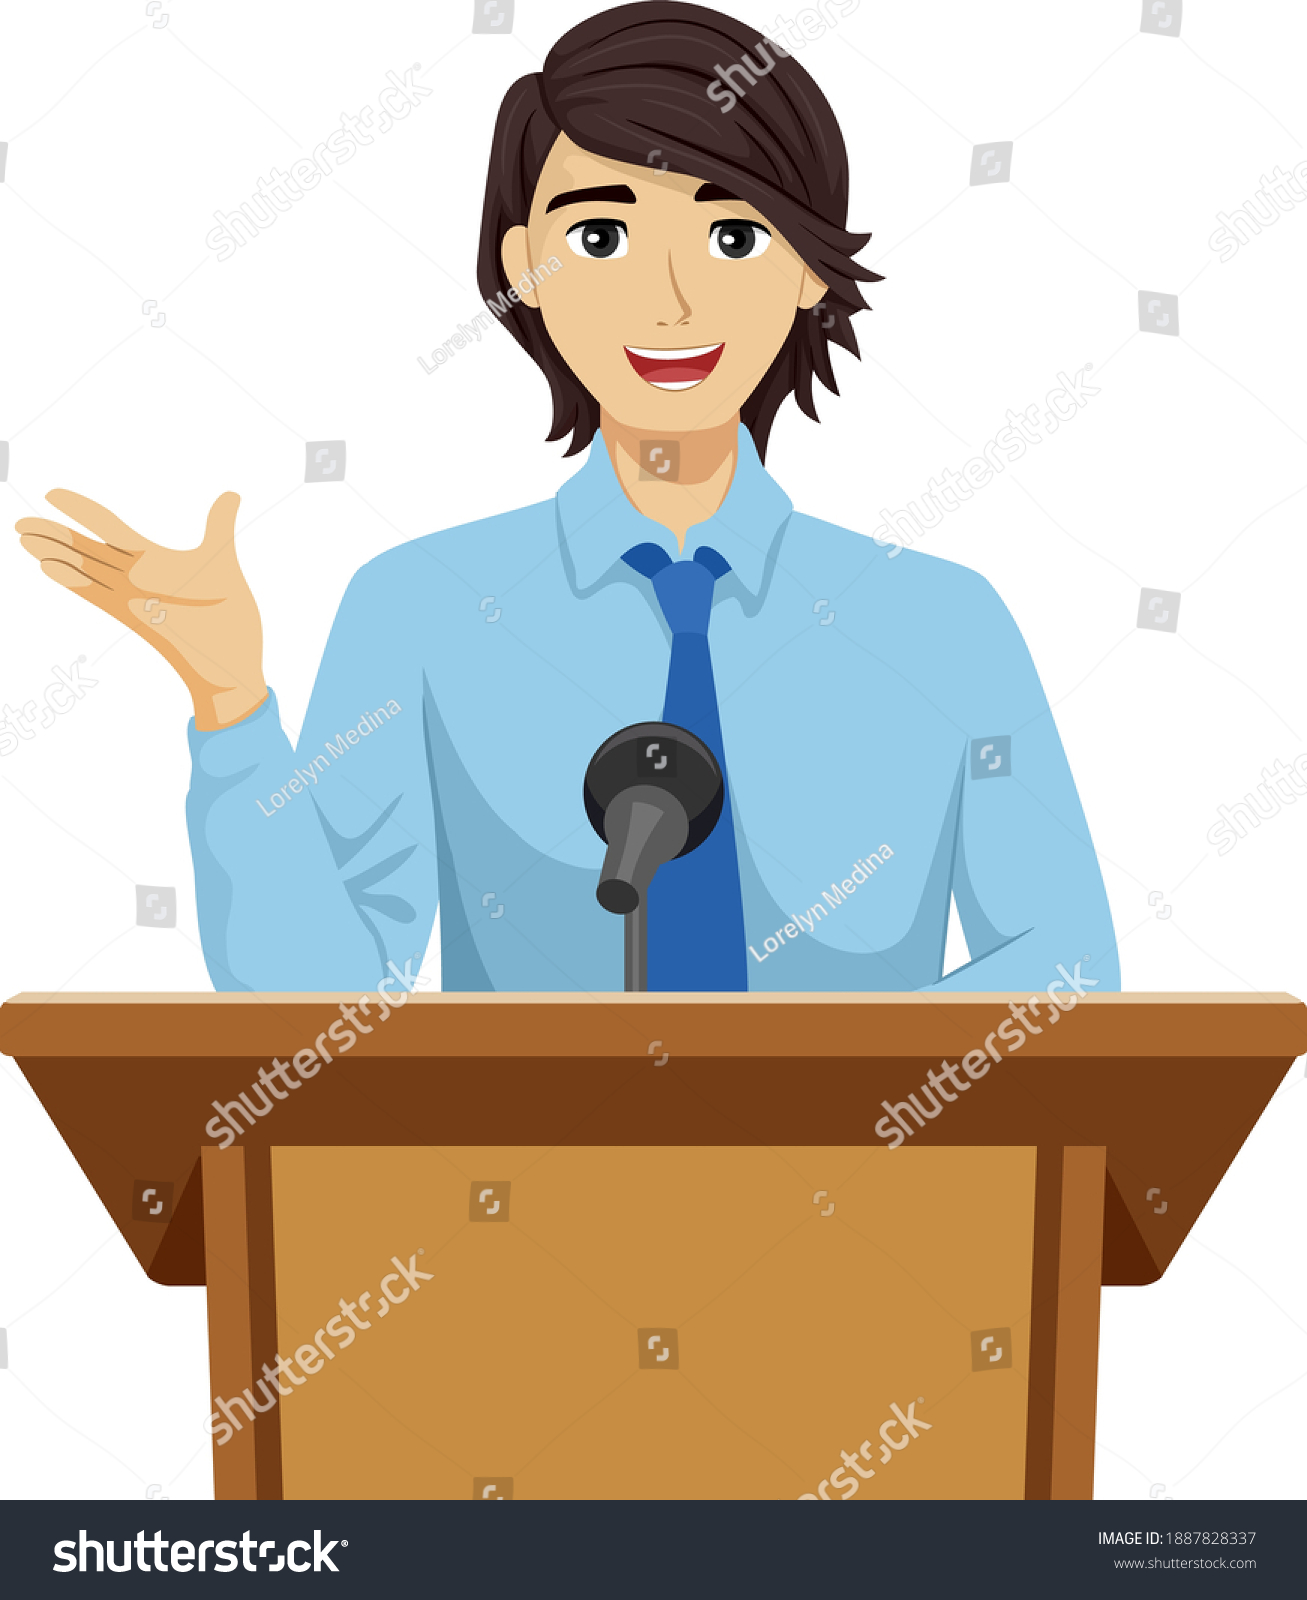 drawing of someone giving a speech